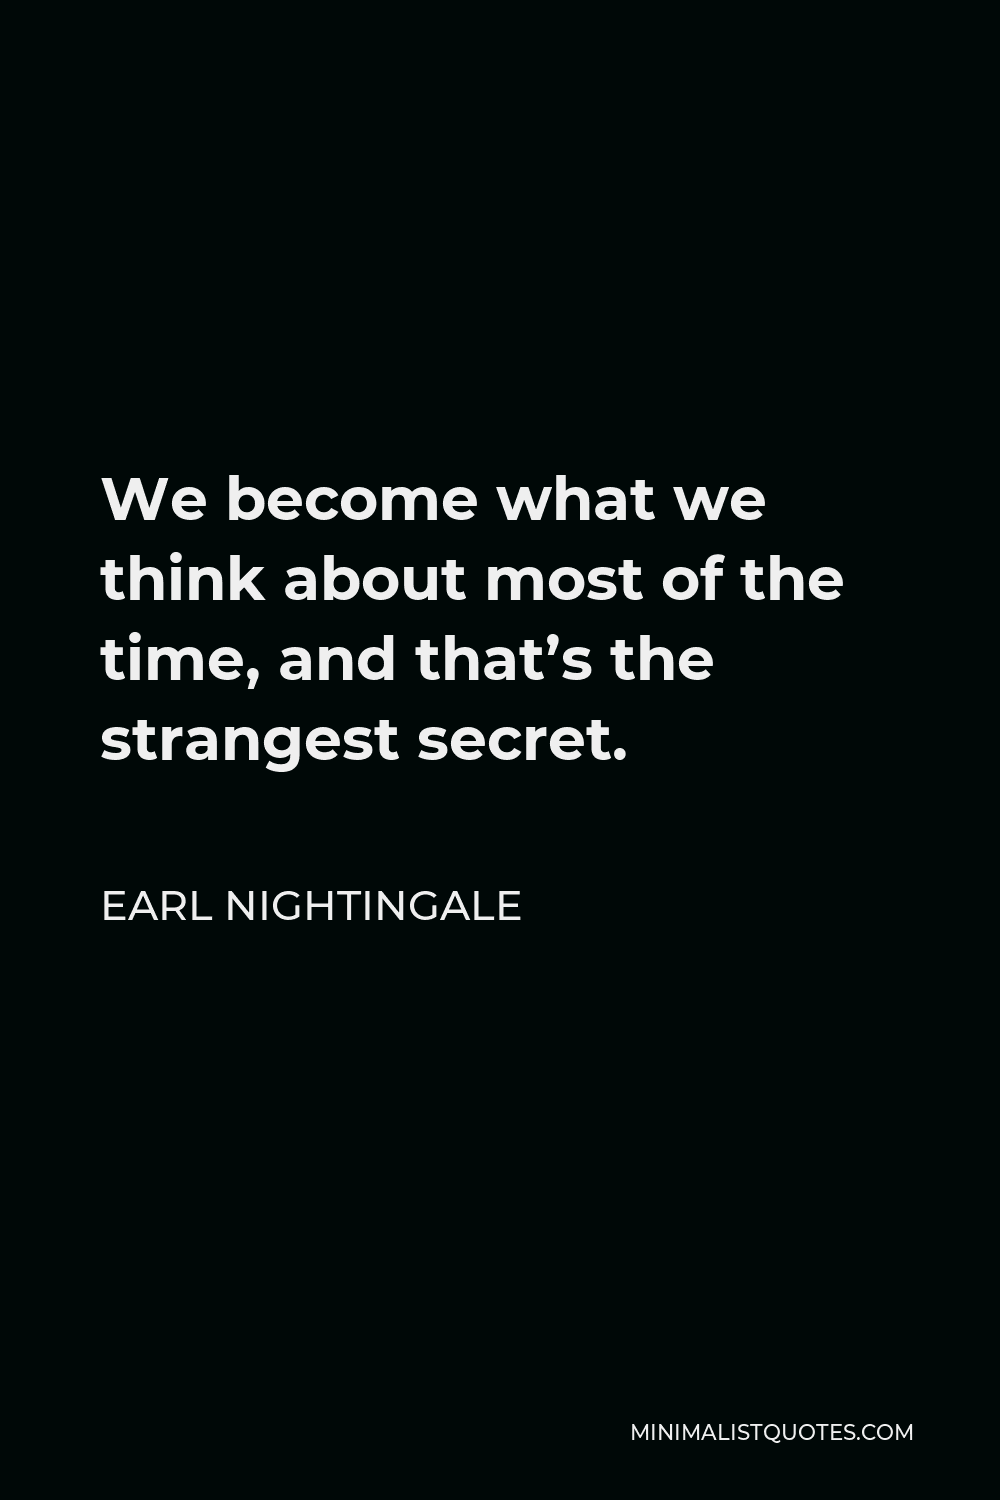 Earl Nightingale Quote - We become what we think about most of the time, and that’s the strangest secret.